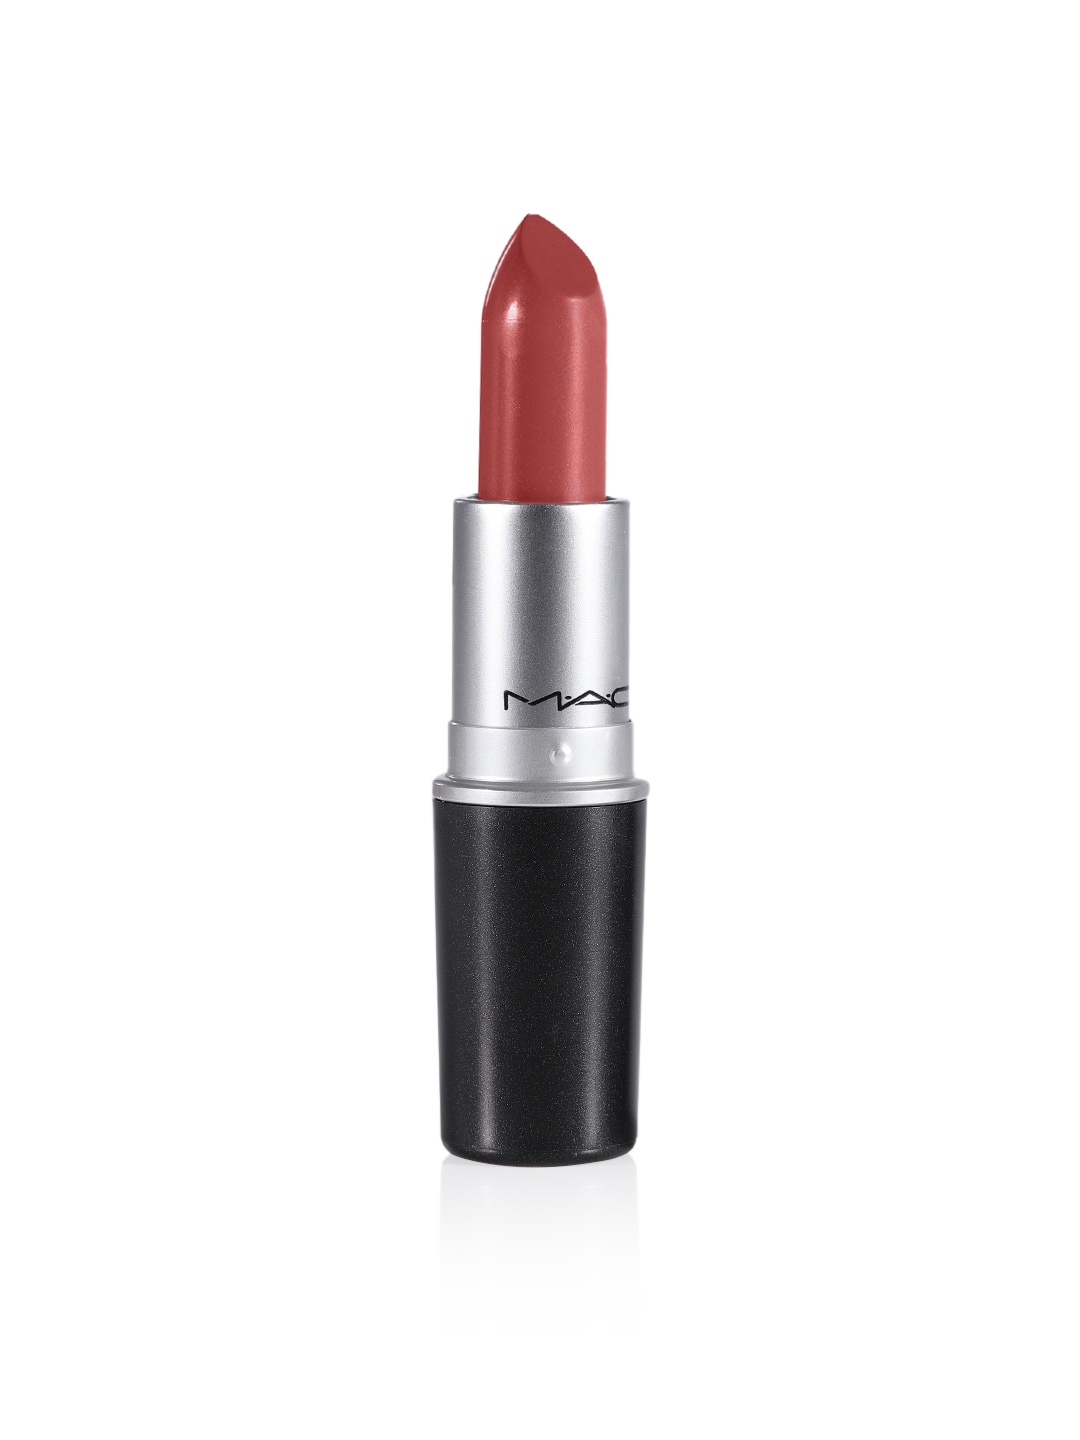 M.A.C Amplified Lipstick - Smoked Almond 128 3 gm Price in India